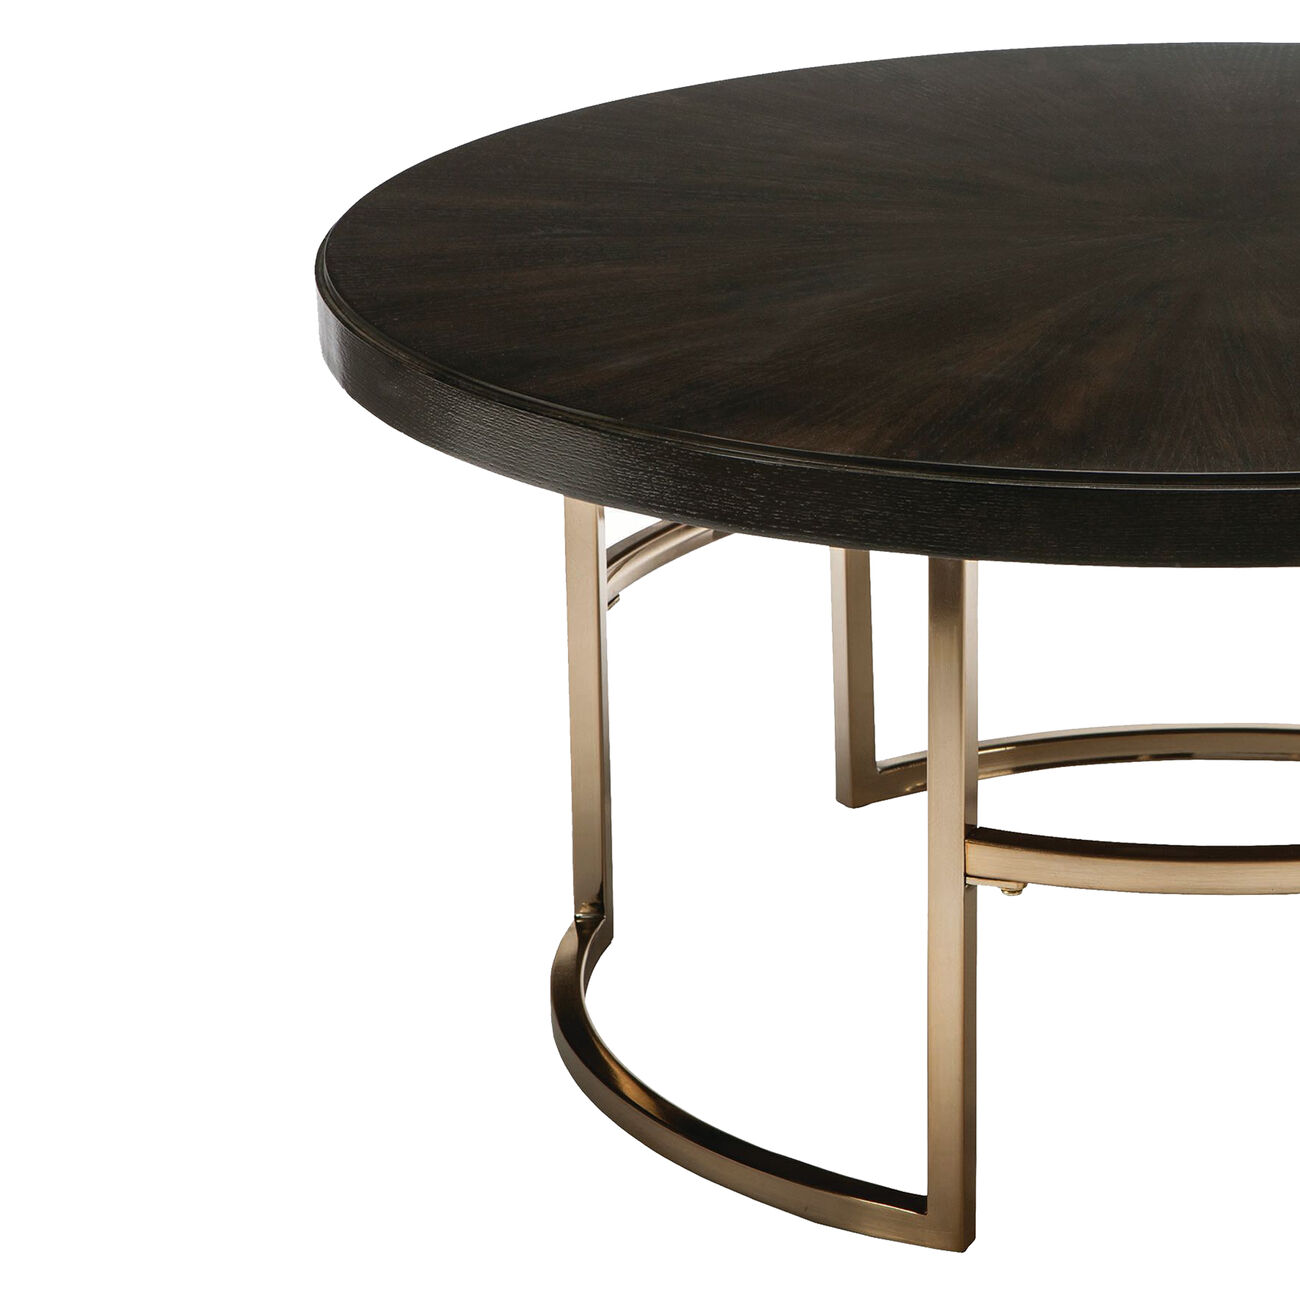 Round Wood Top Coffee Table with U shaped Legs, Brown and Gold